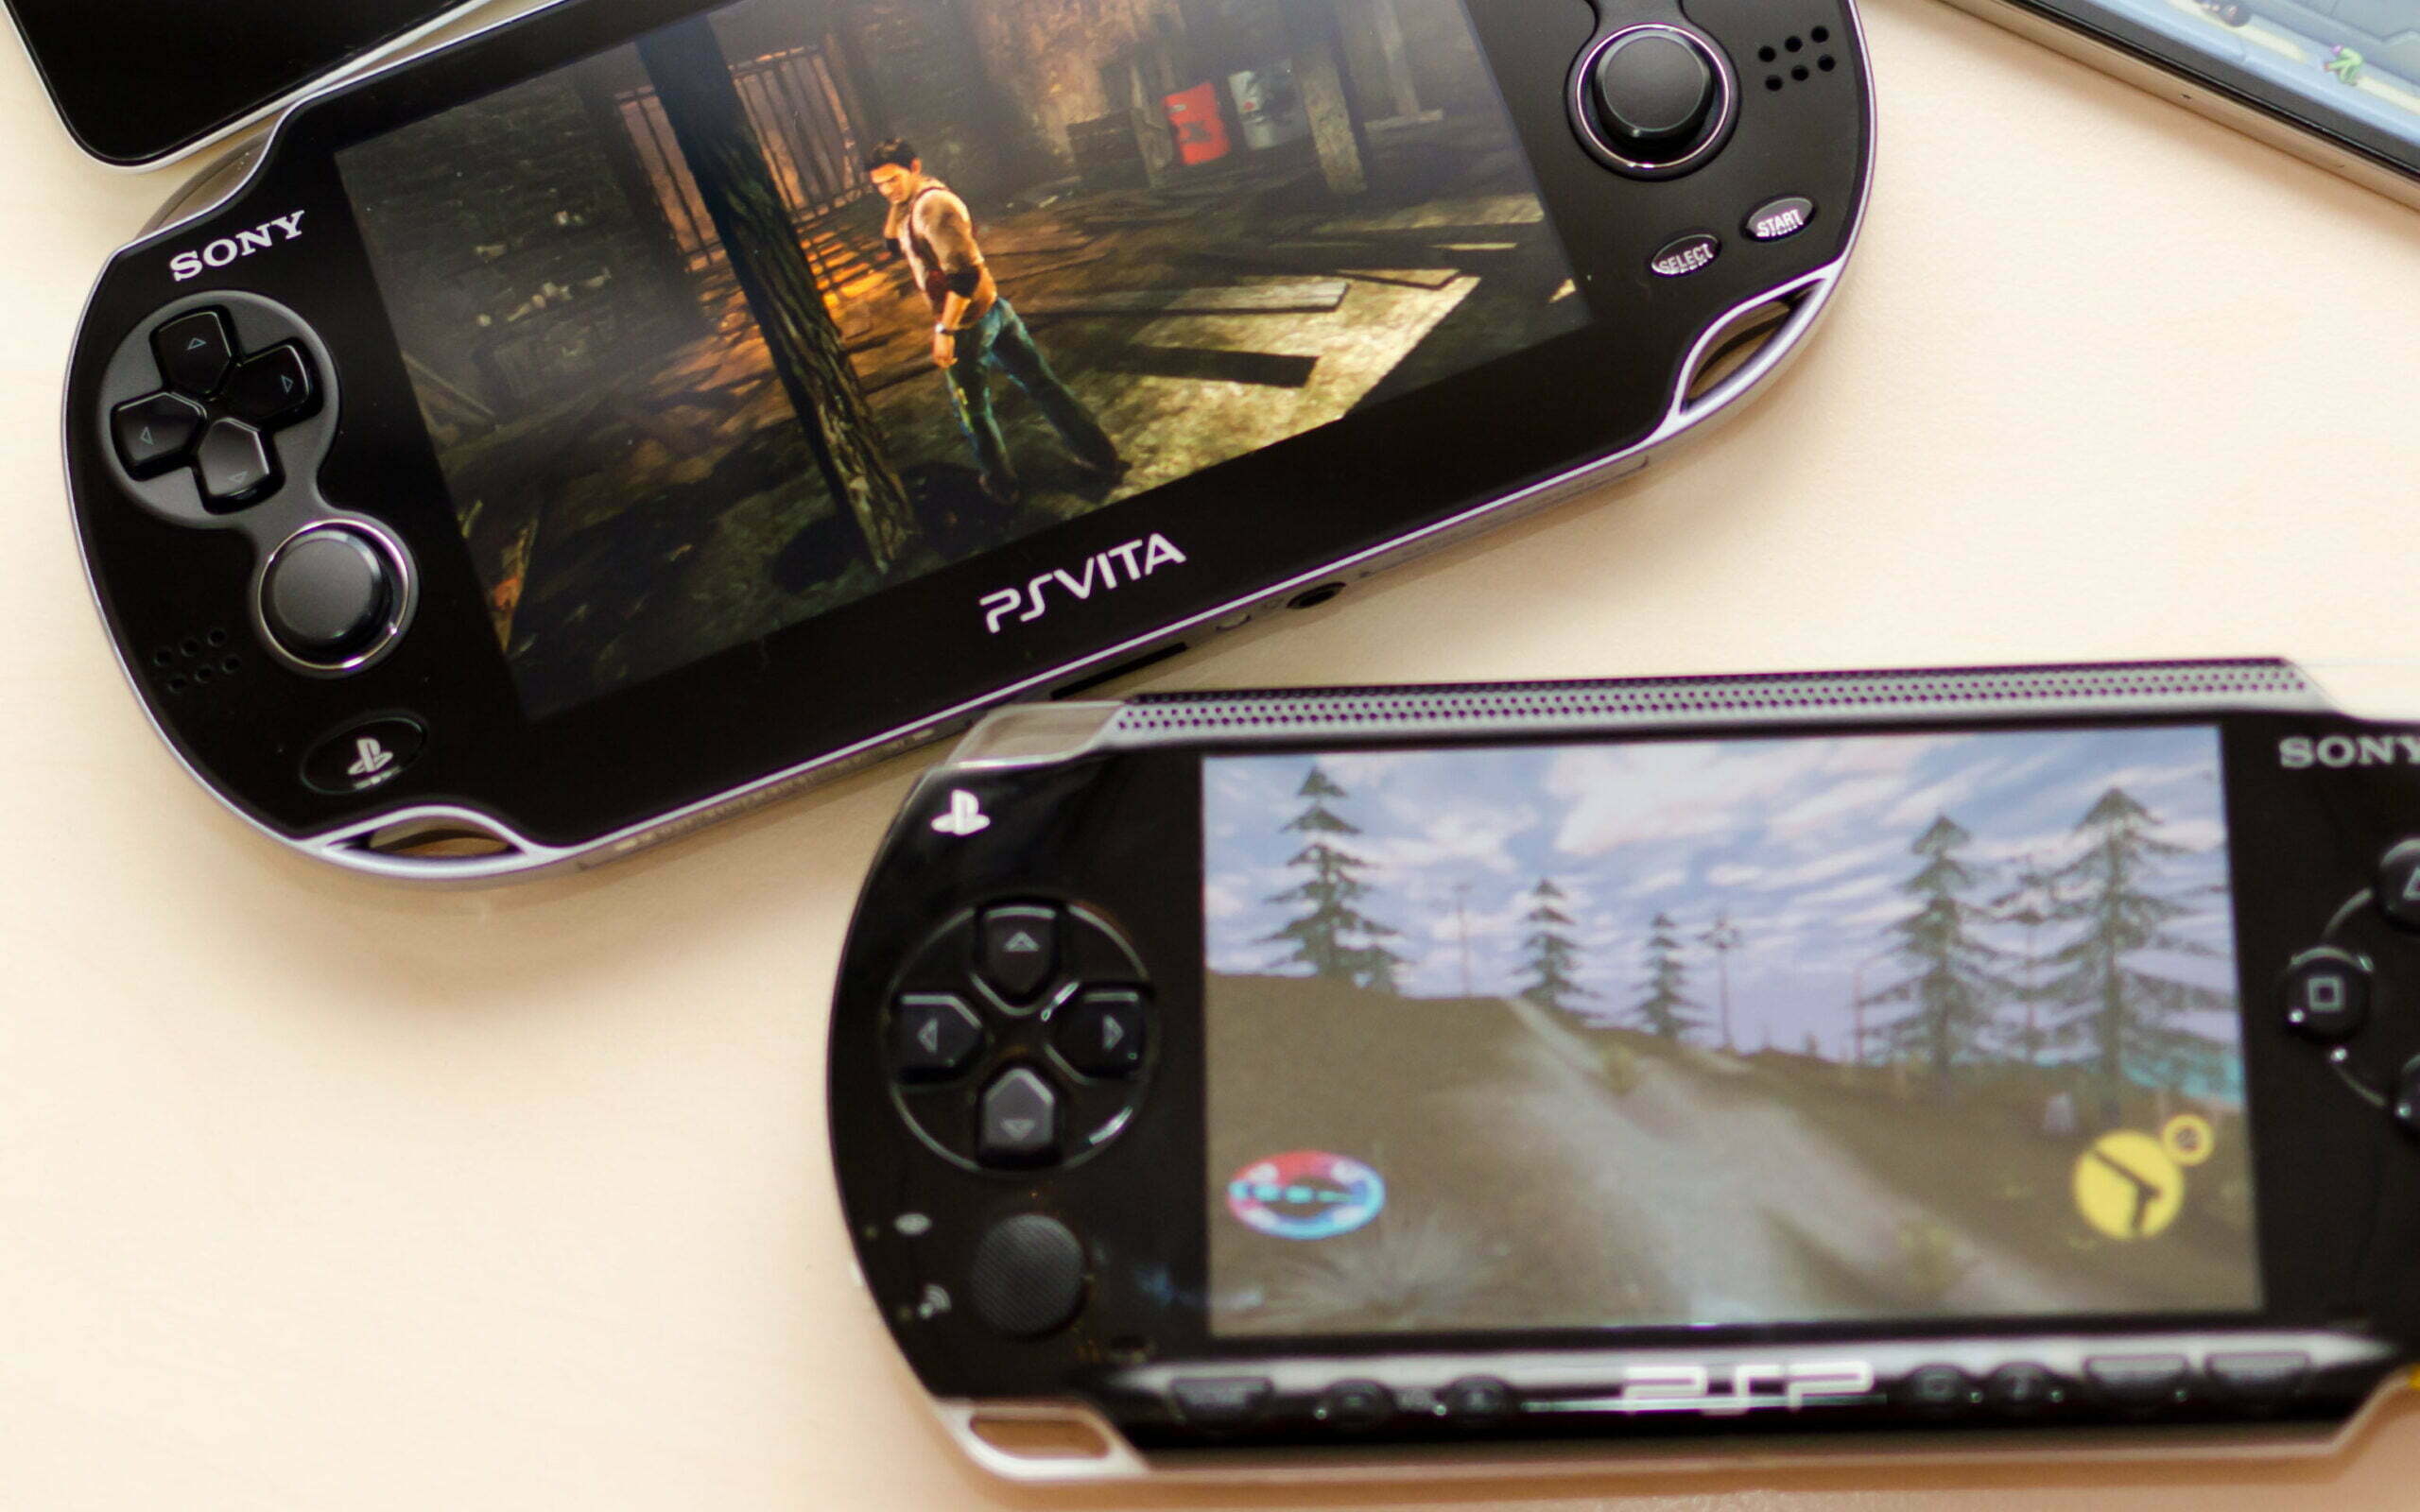 Black PlayStation Vita playing Uncharted: Golden Abyss and a black PlayStation Portable PSP